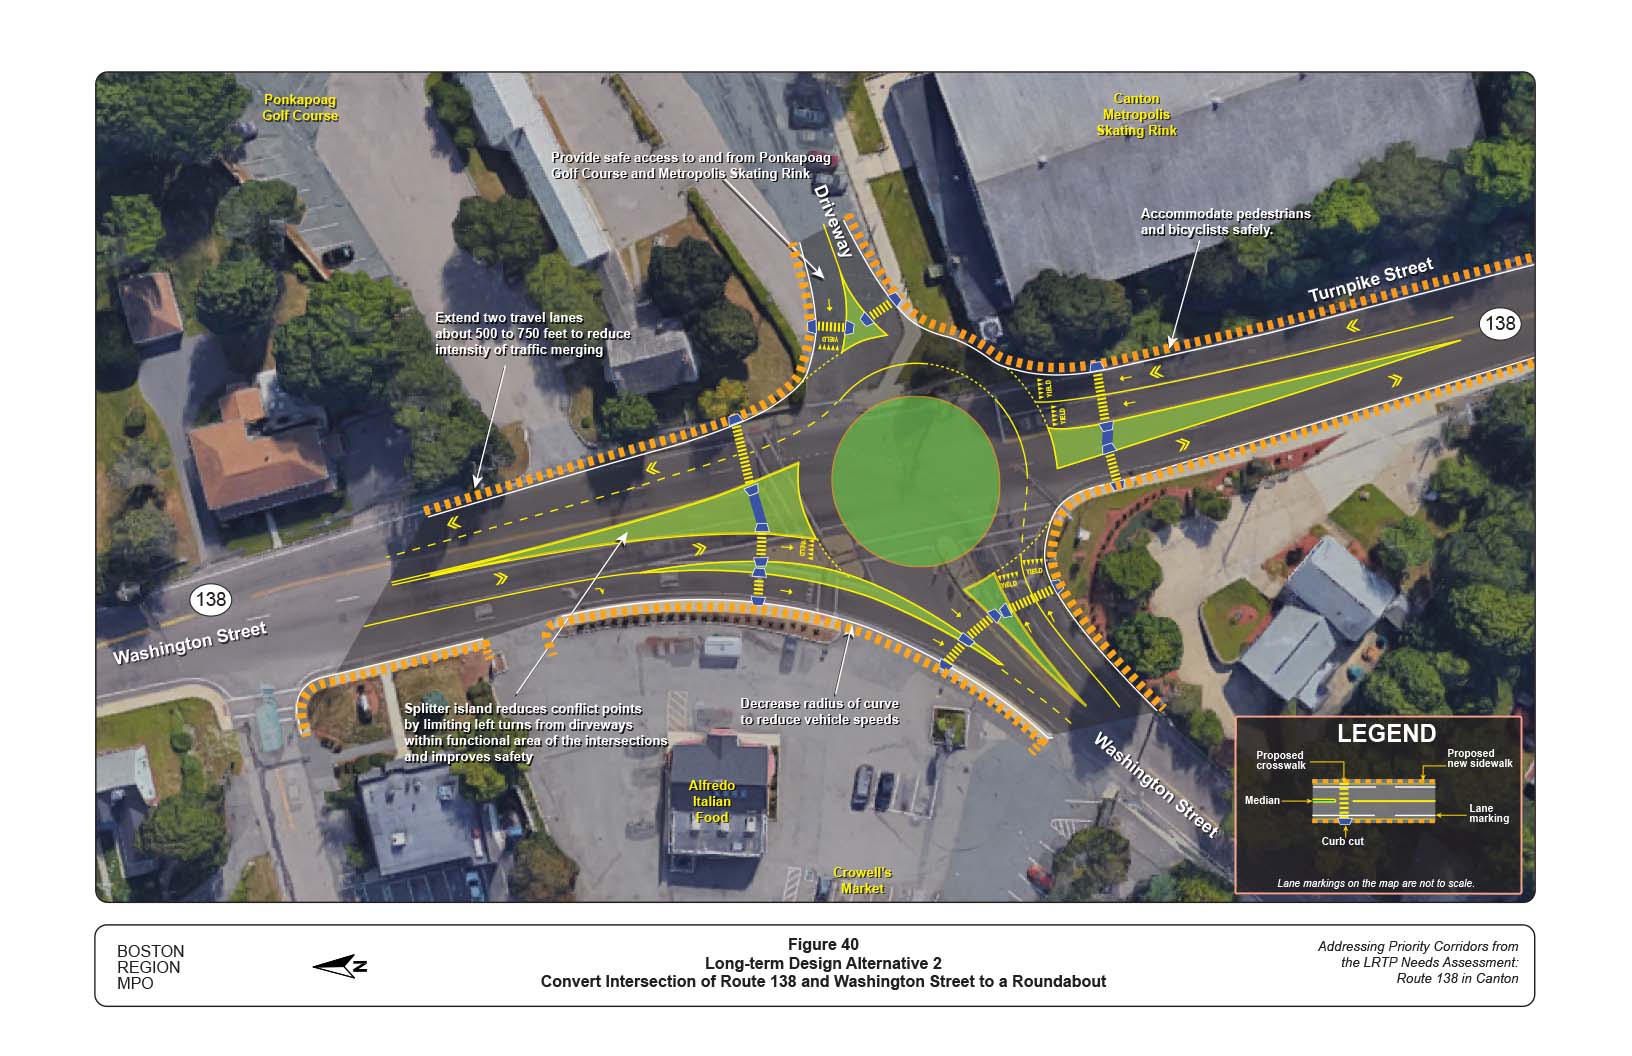 Figure 40 is map of the intersection of Route 138 and Washington Street with overlays showing a proposed redesign of the intersection into a roundabout and other proposed improvements to the roadway.